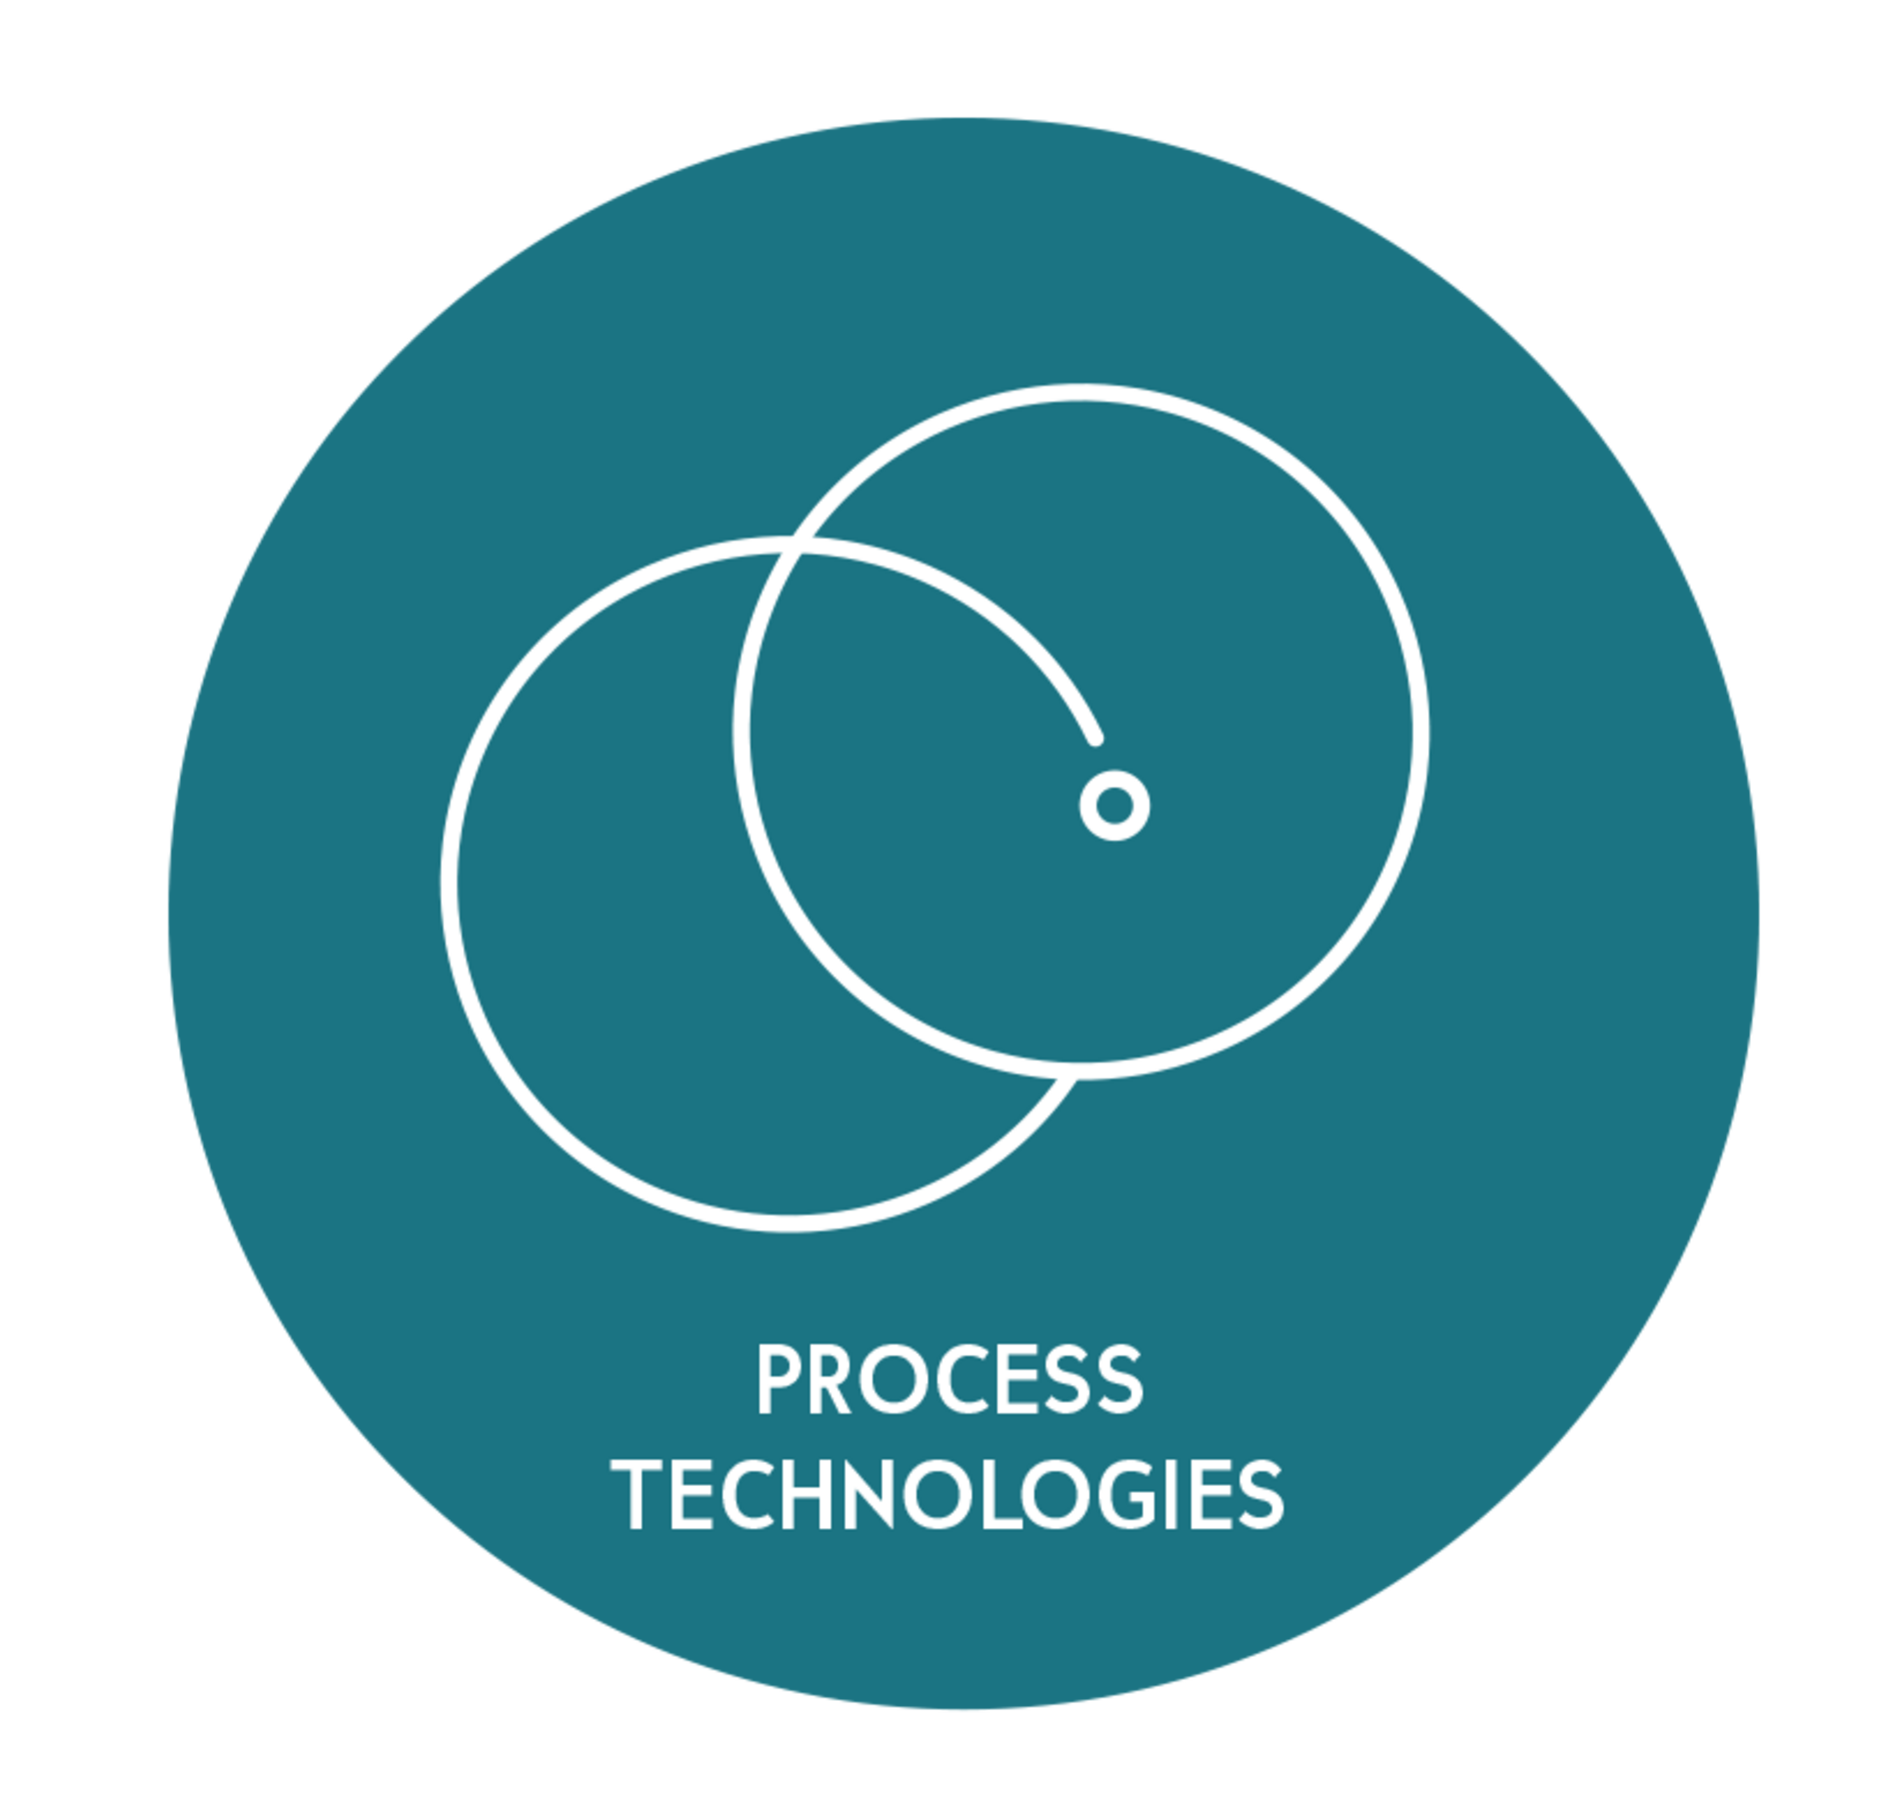 Process Technologies from Fives